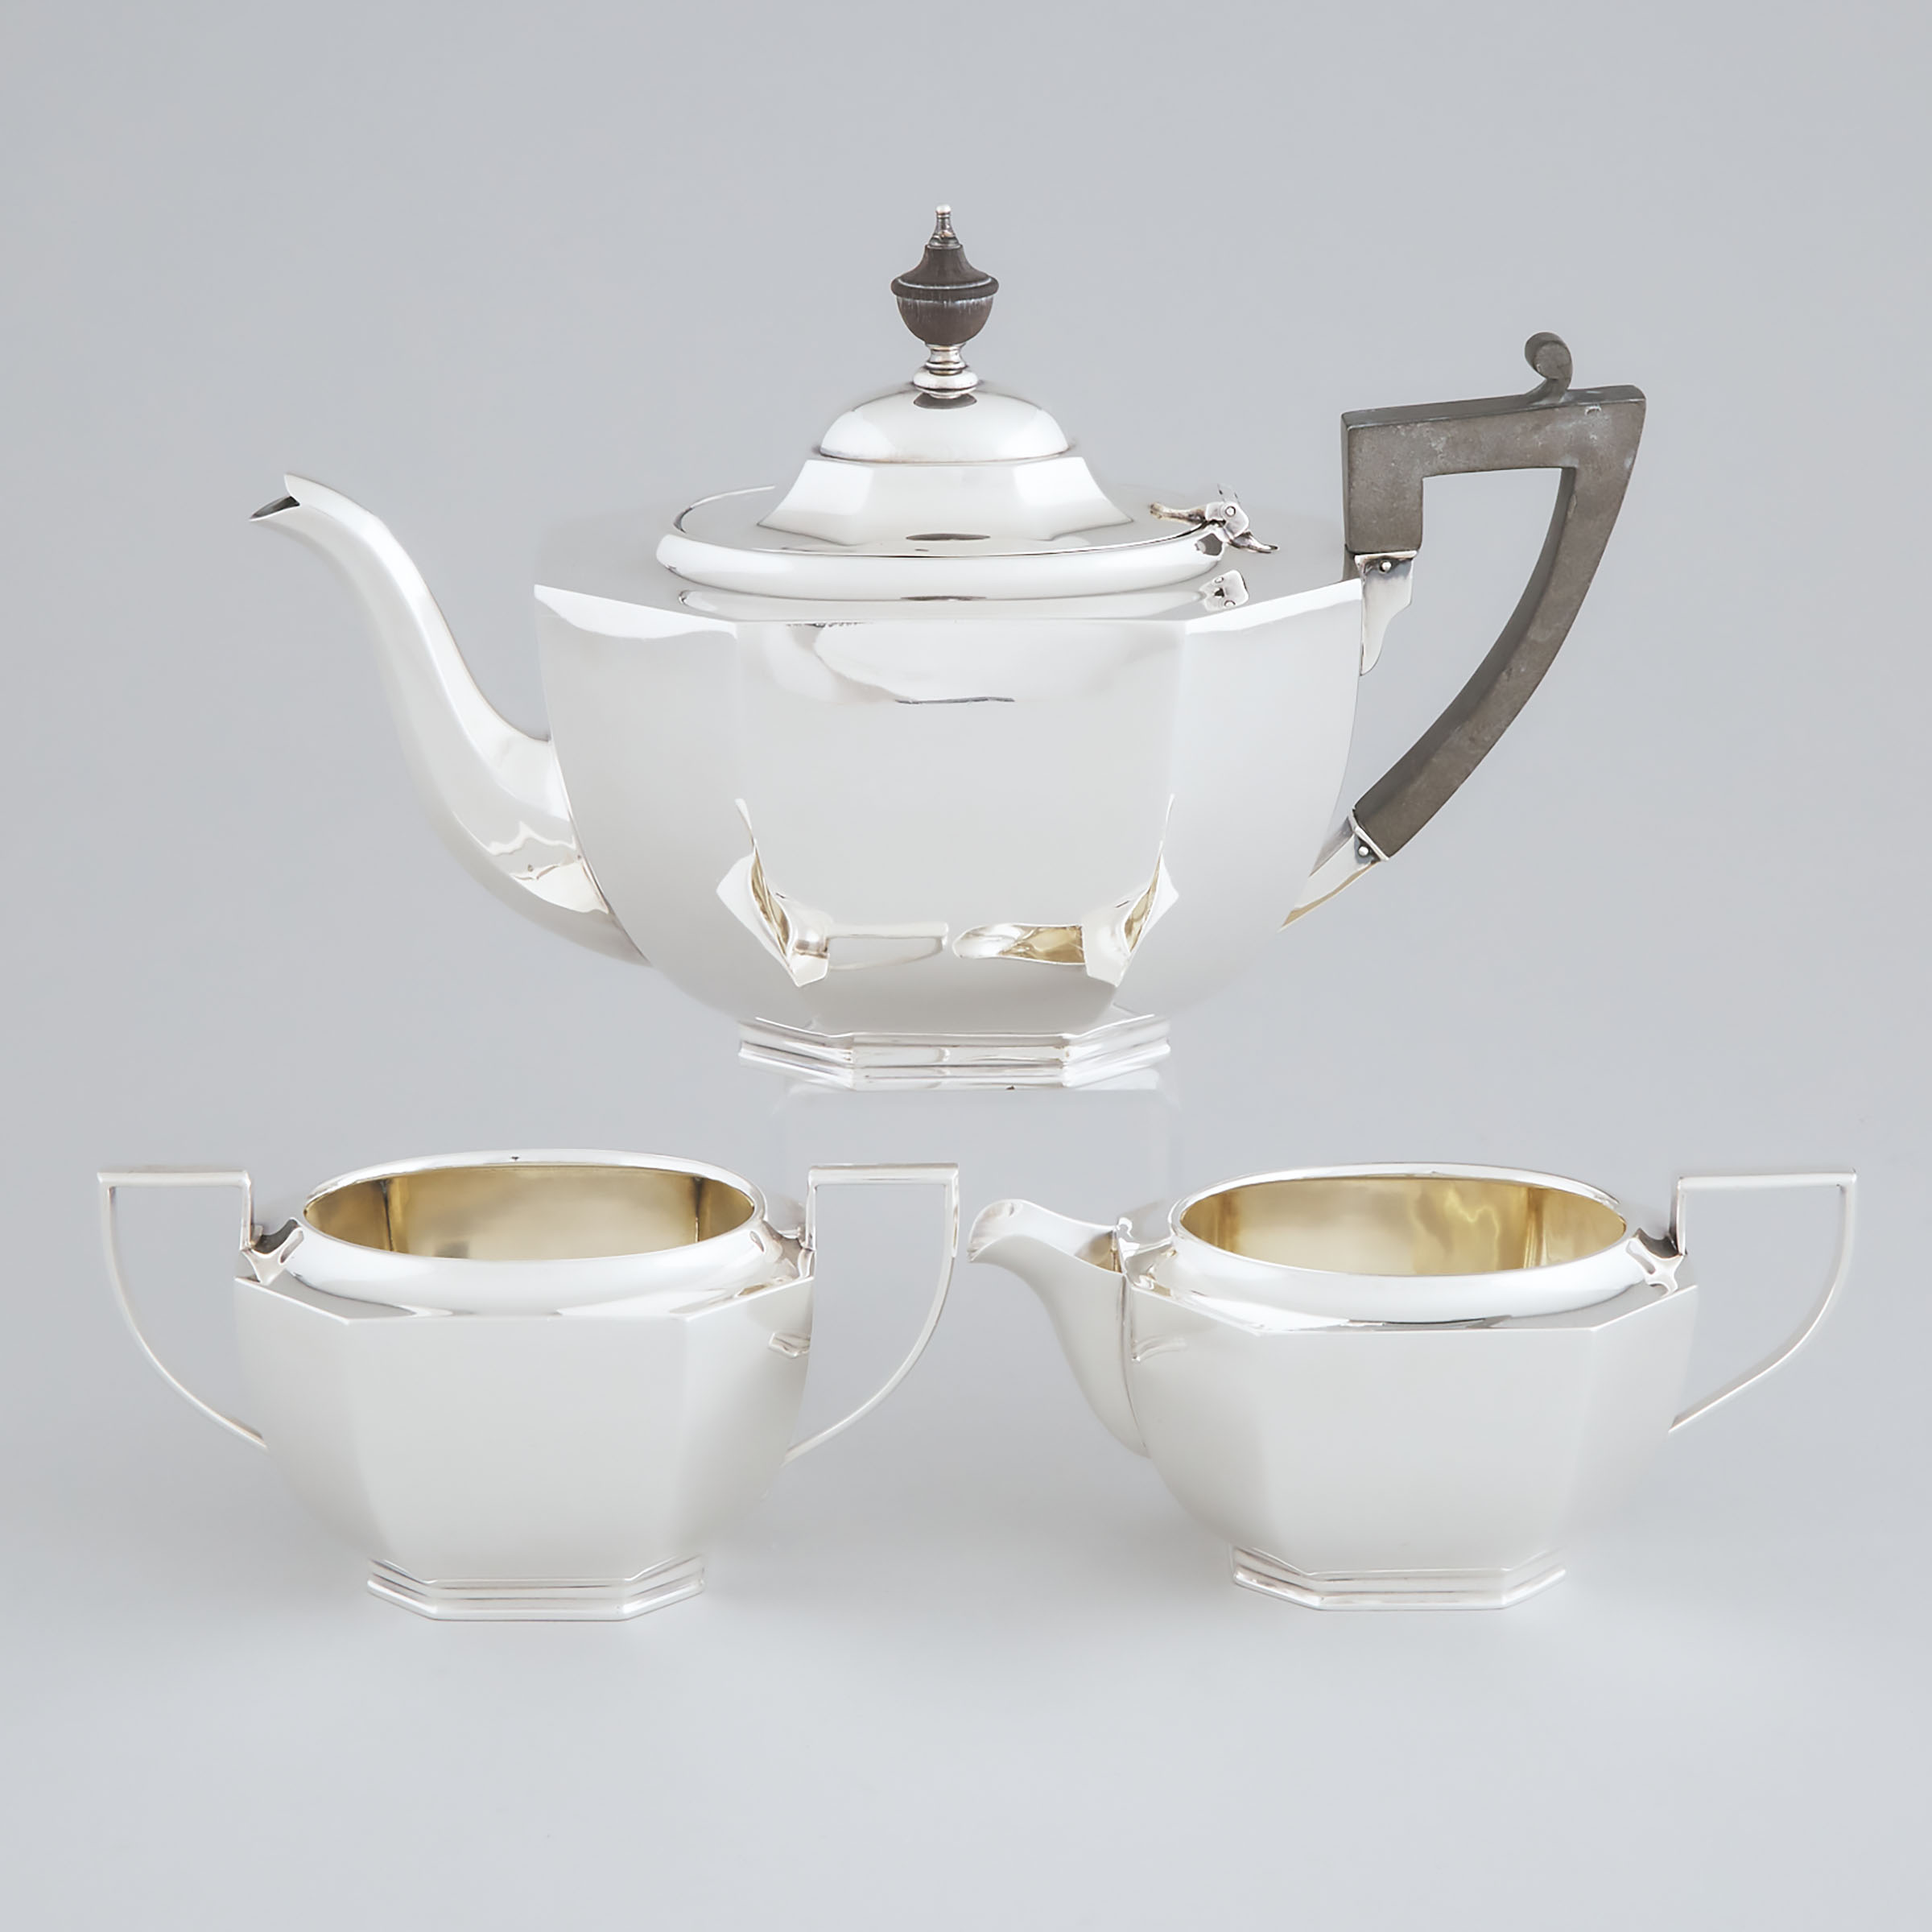 Canadian Silver Tea Service, Henry Birks & Sons, Montreal, Que., 1904-24